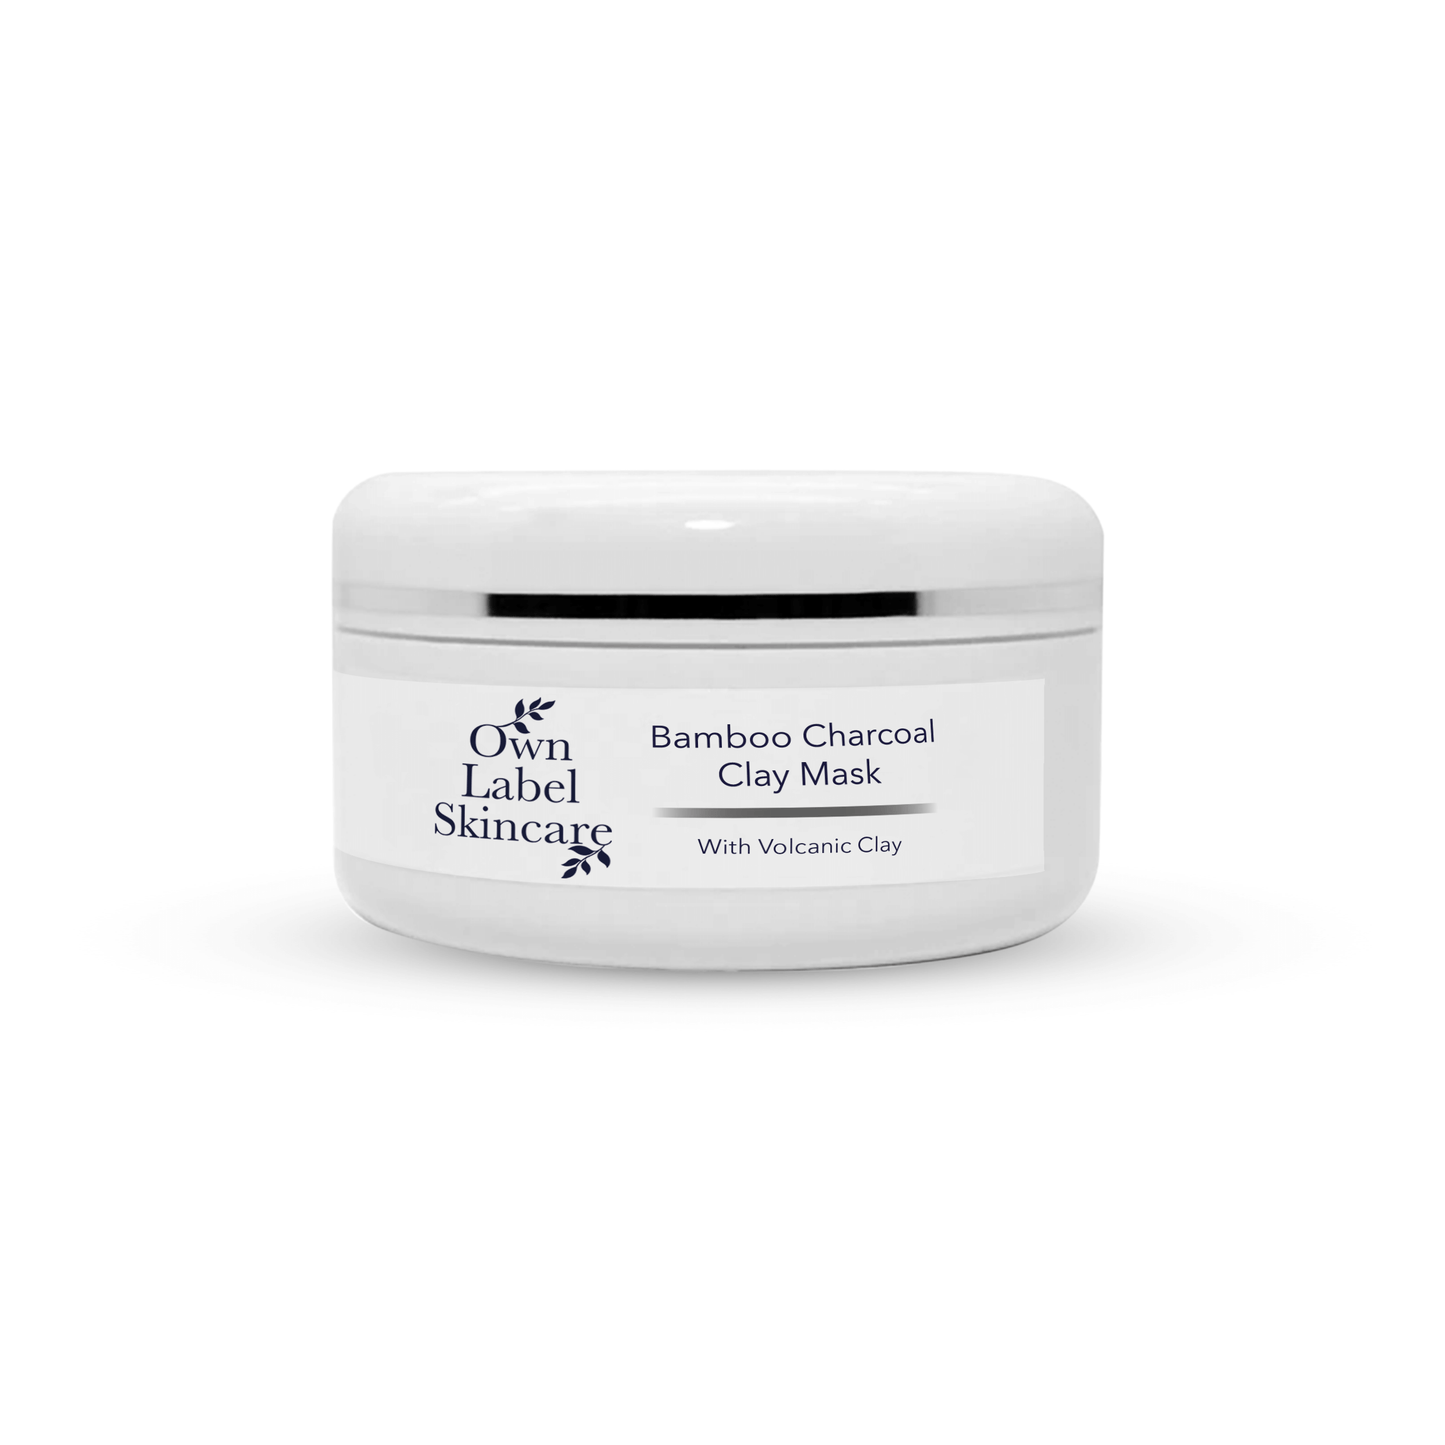 Bamboo Charcoal Clay Mask | White Label Skincare